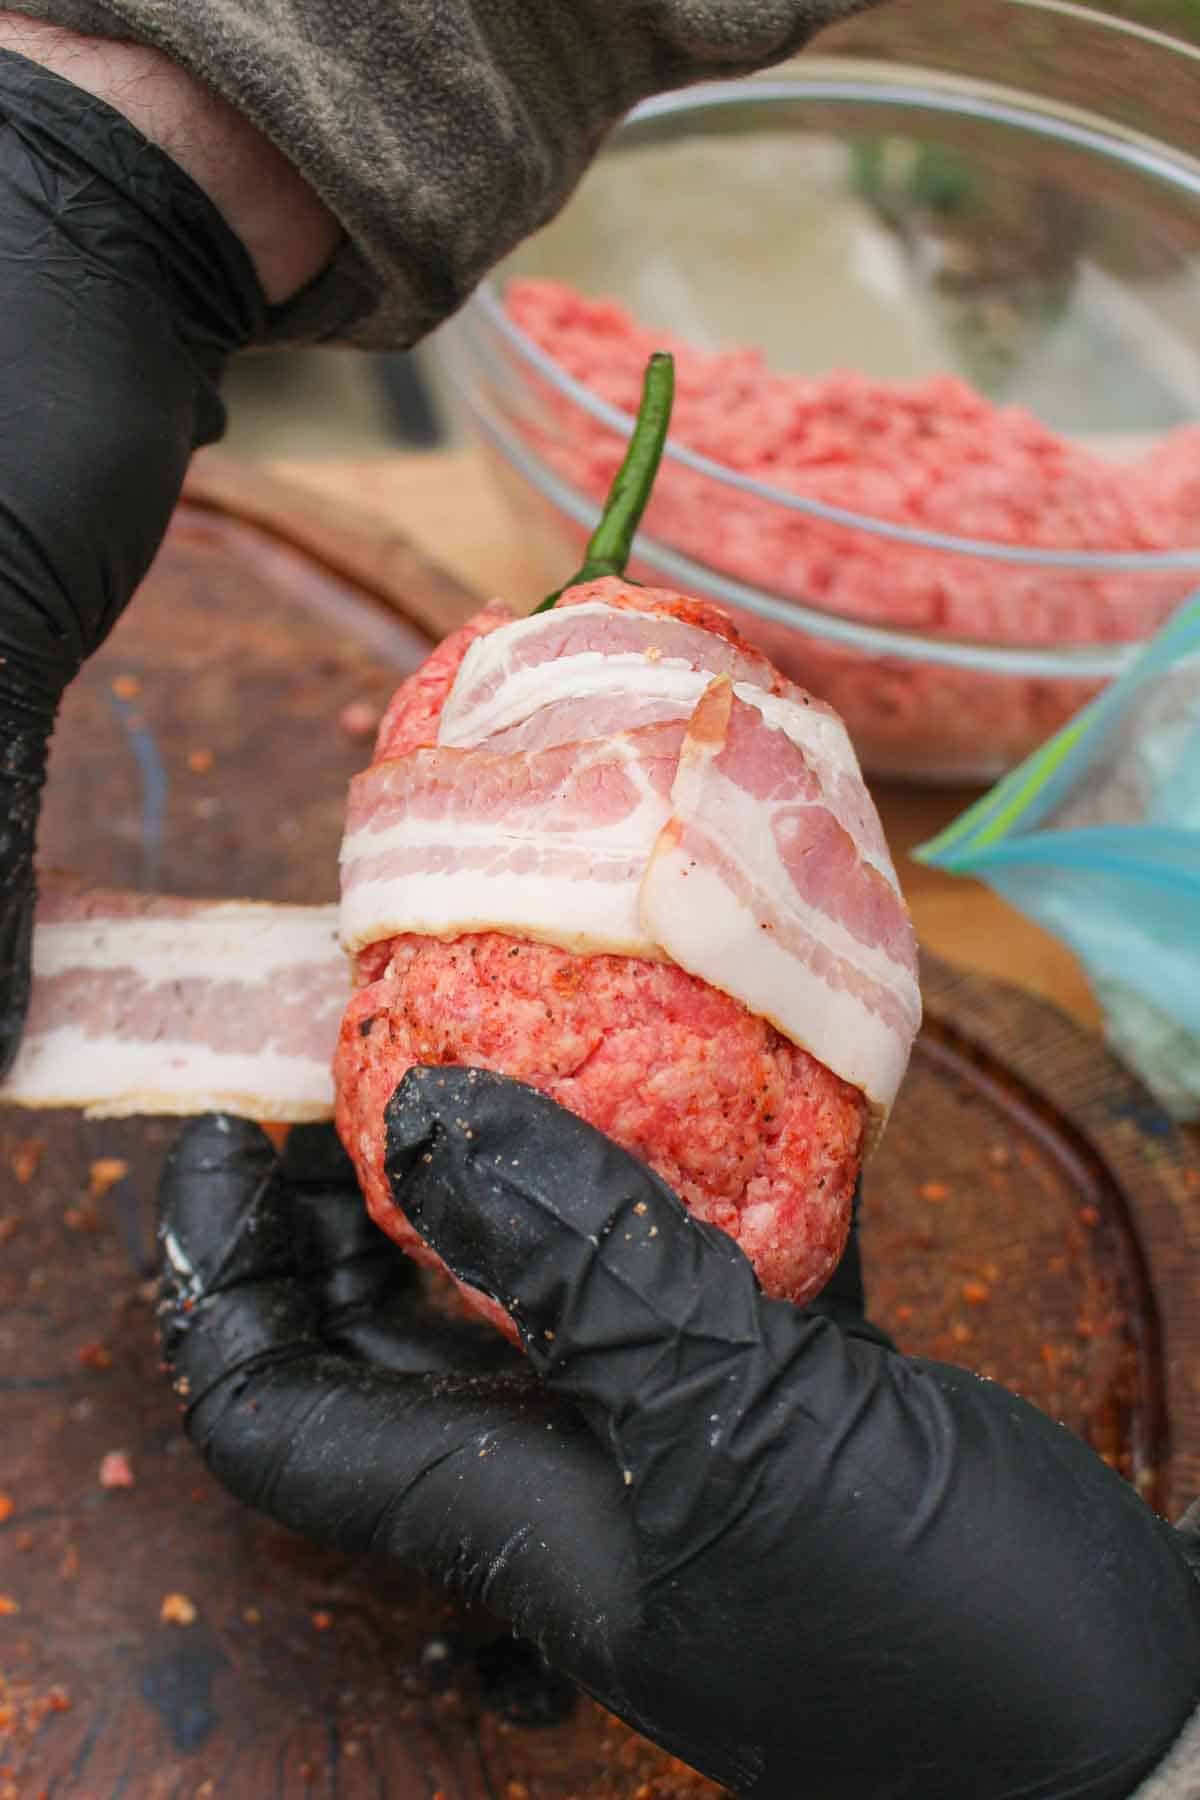 Wrapping the beef armadillo egg in bacon.